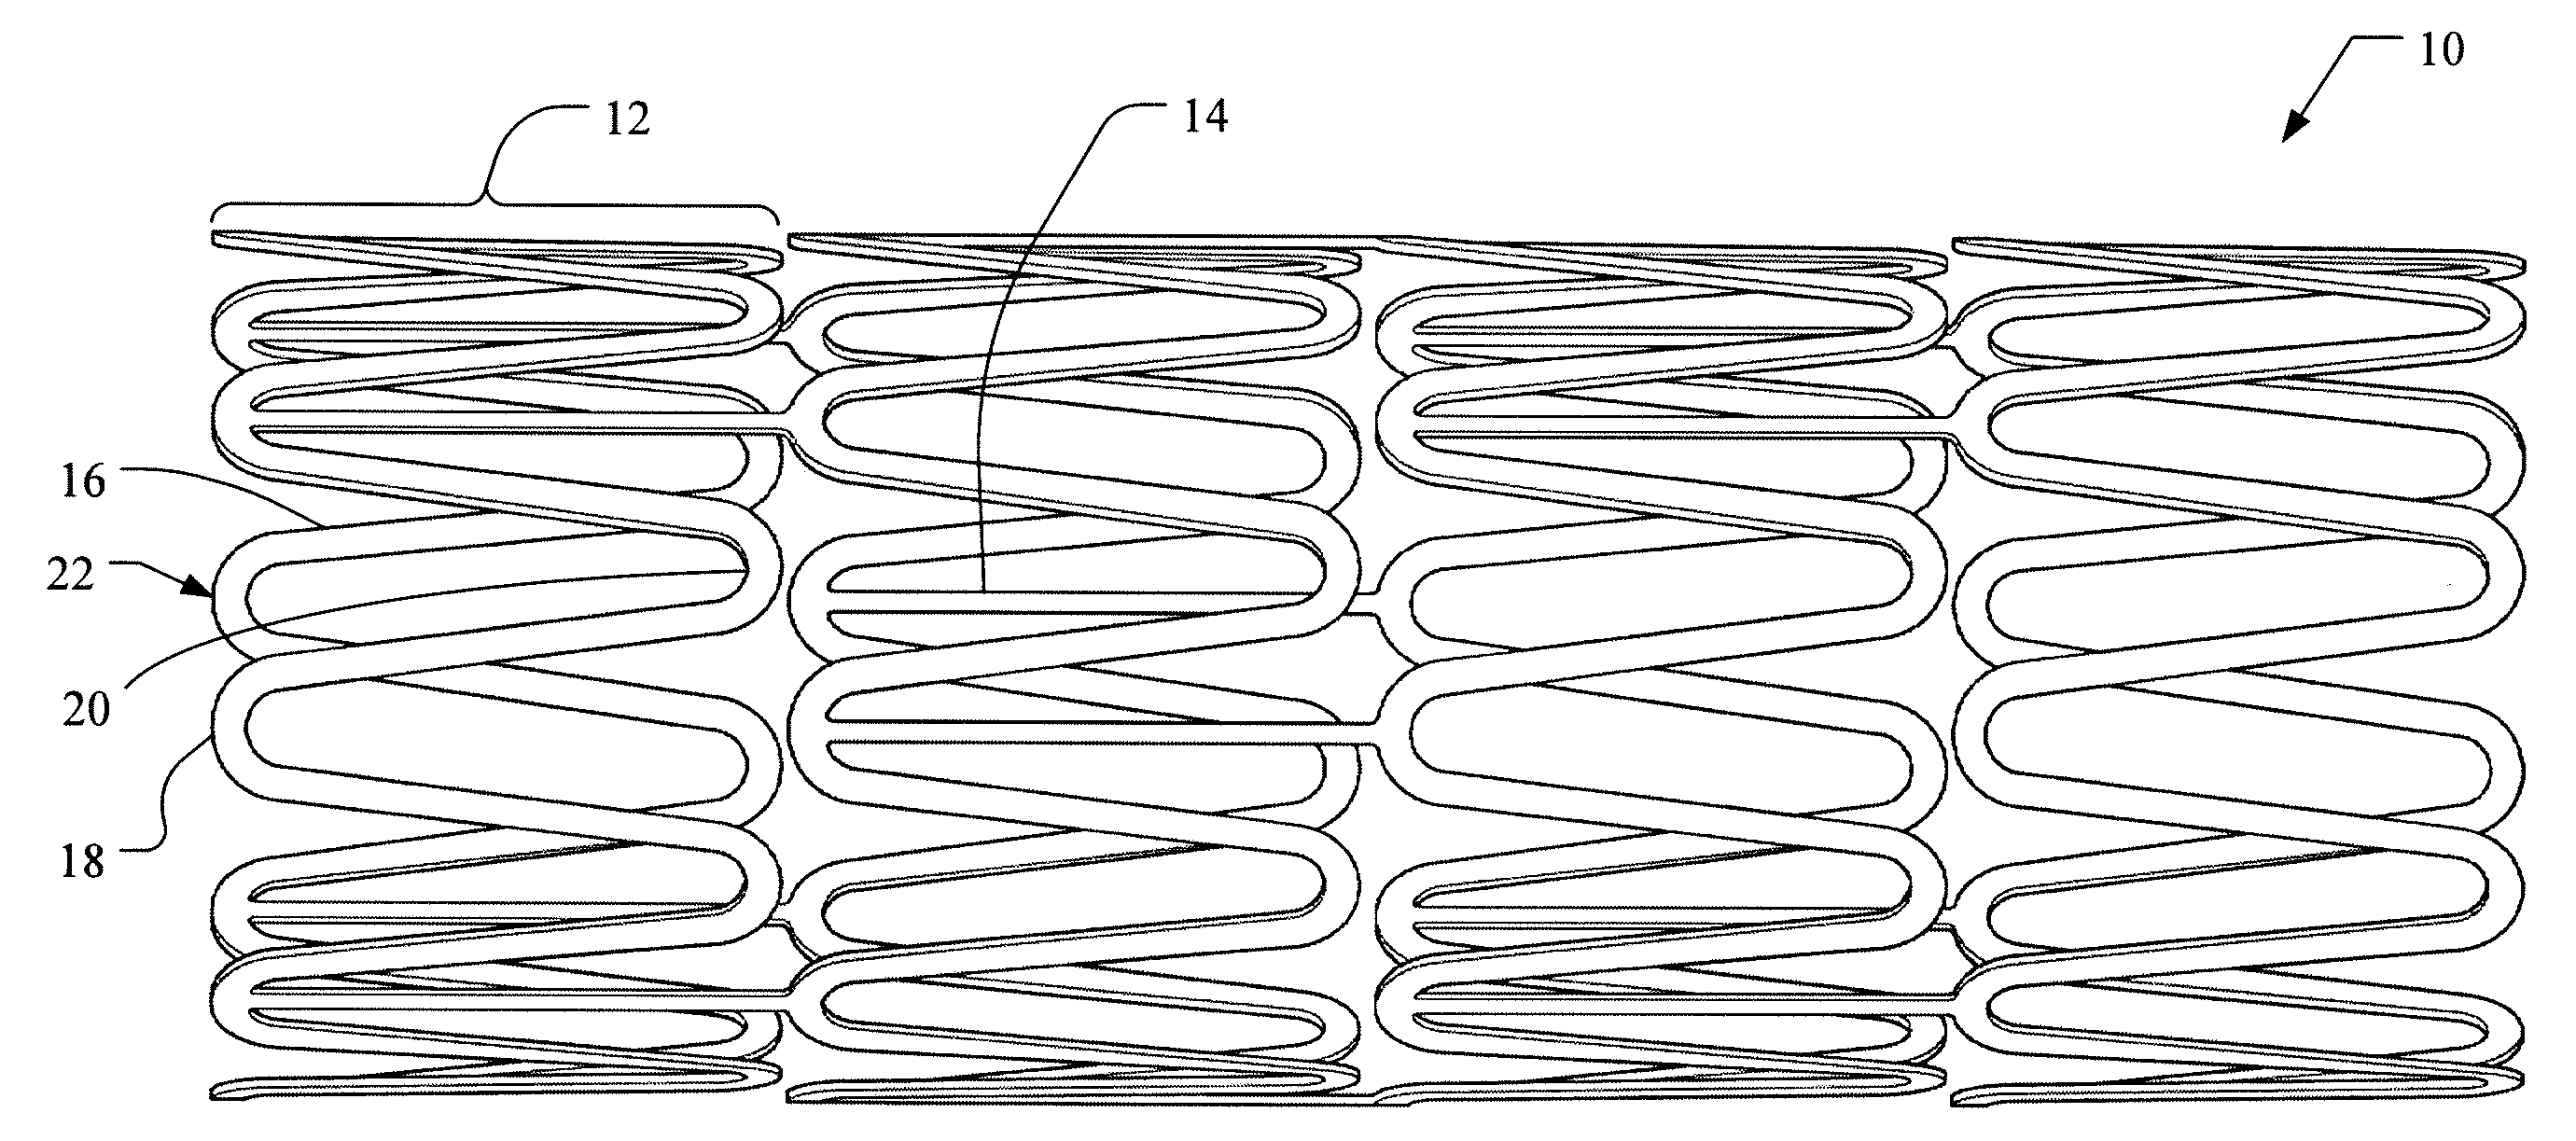 Covered balloon expandable stent design and method of covering